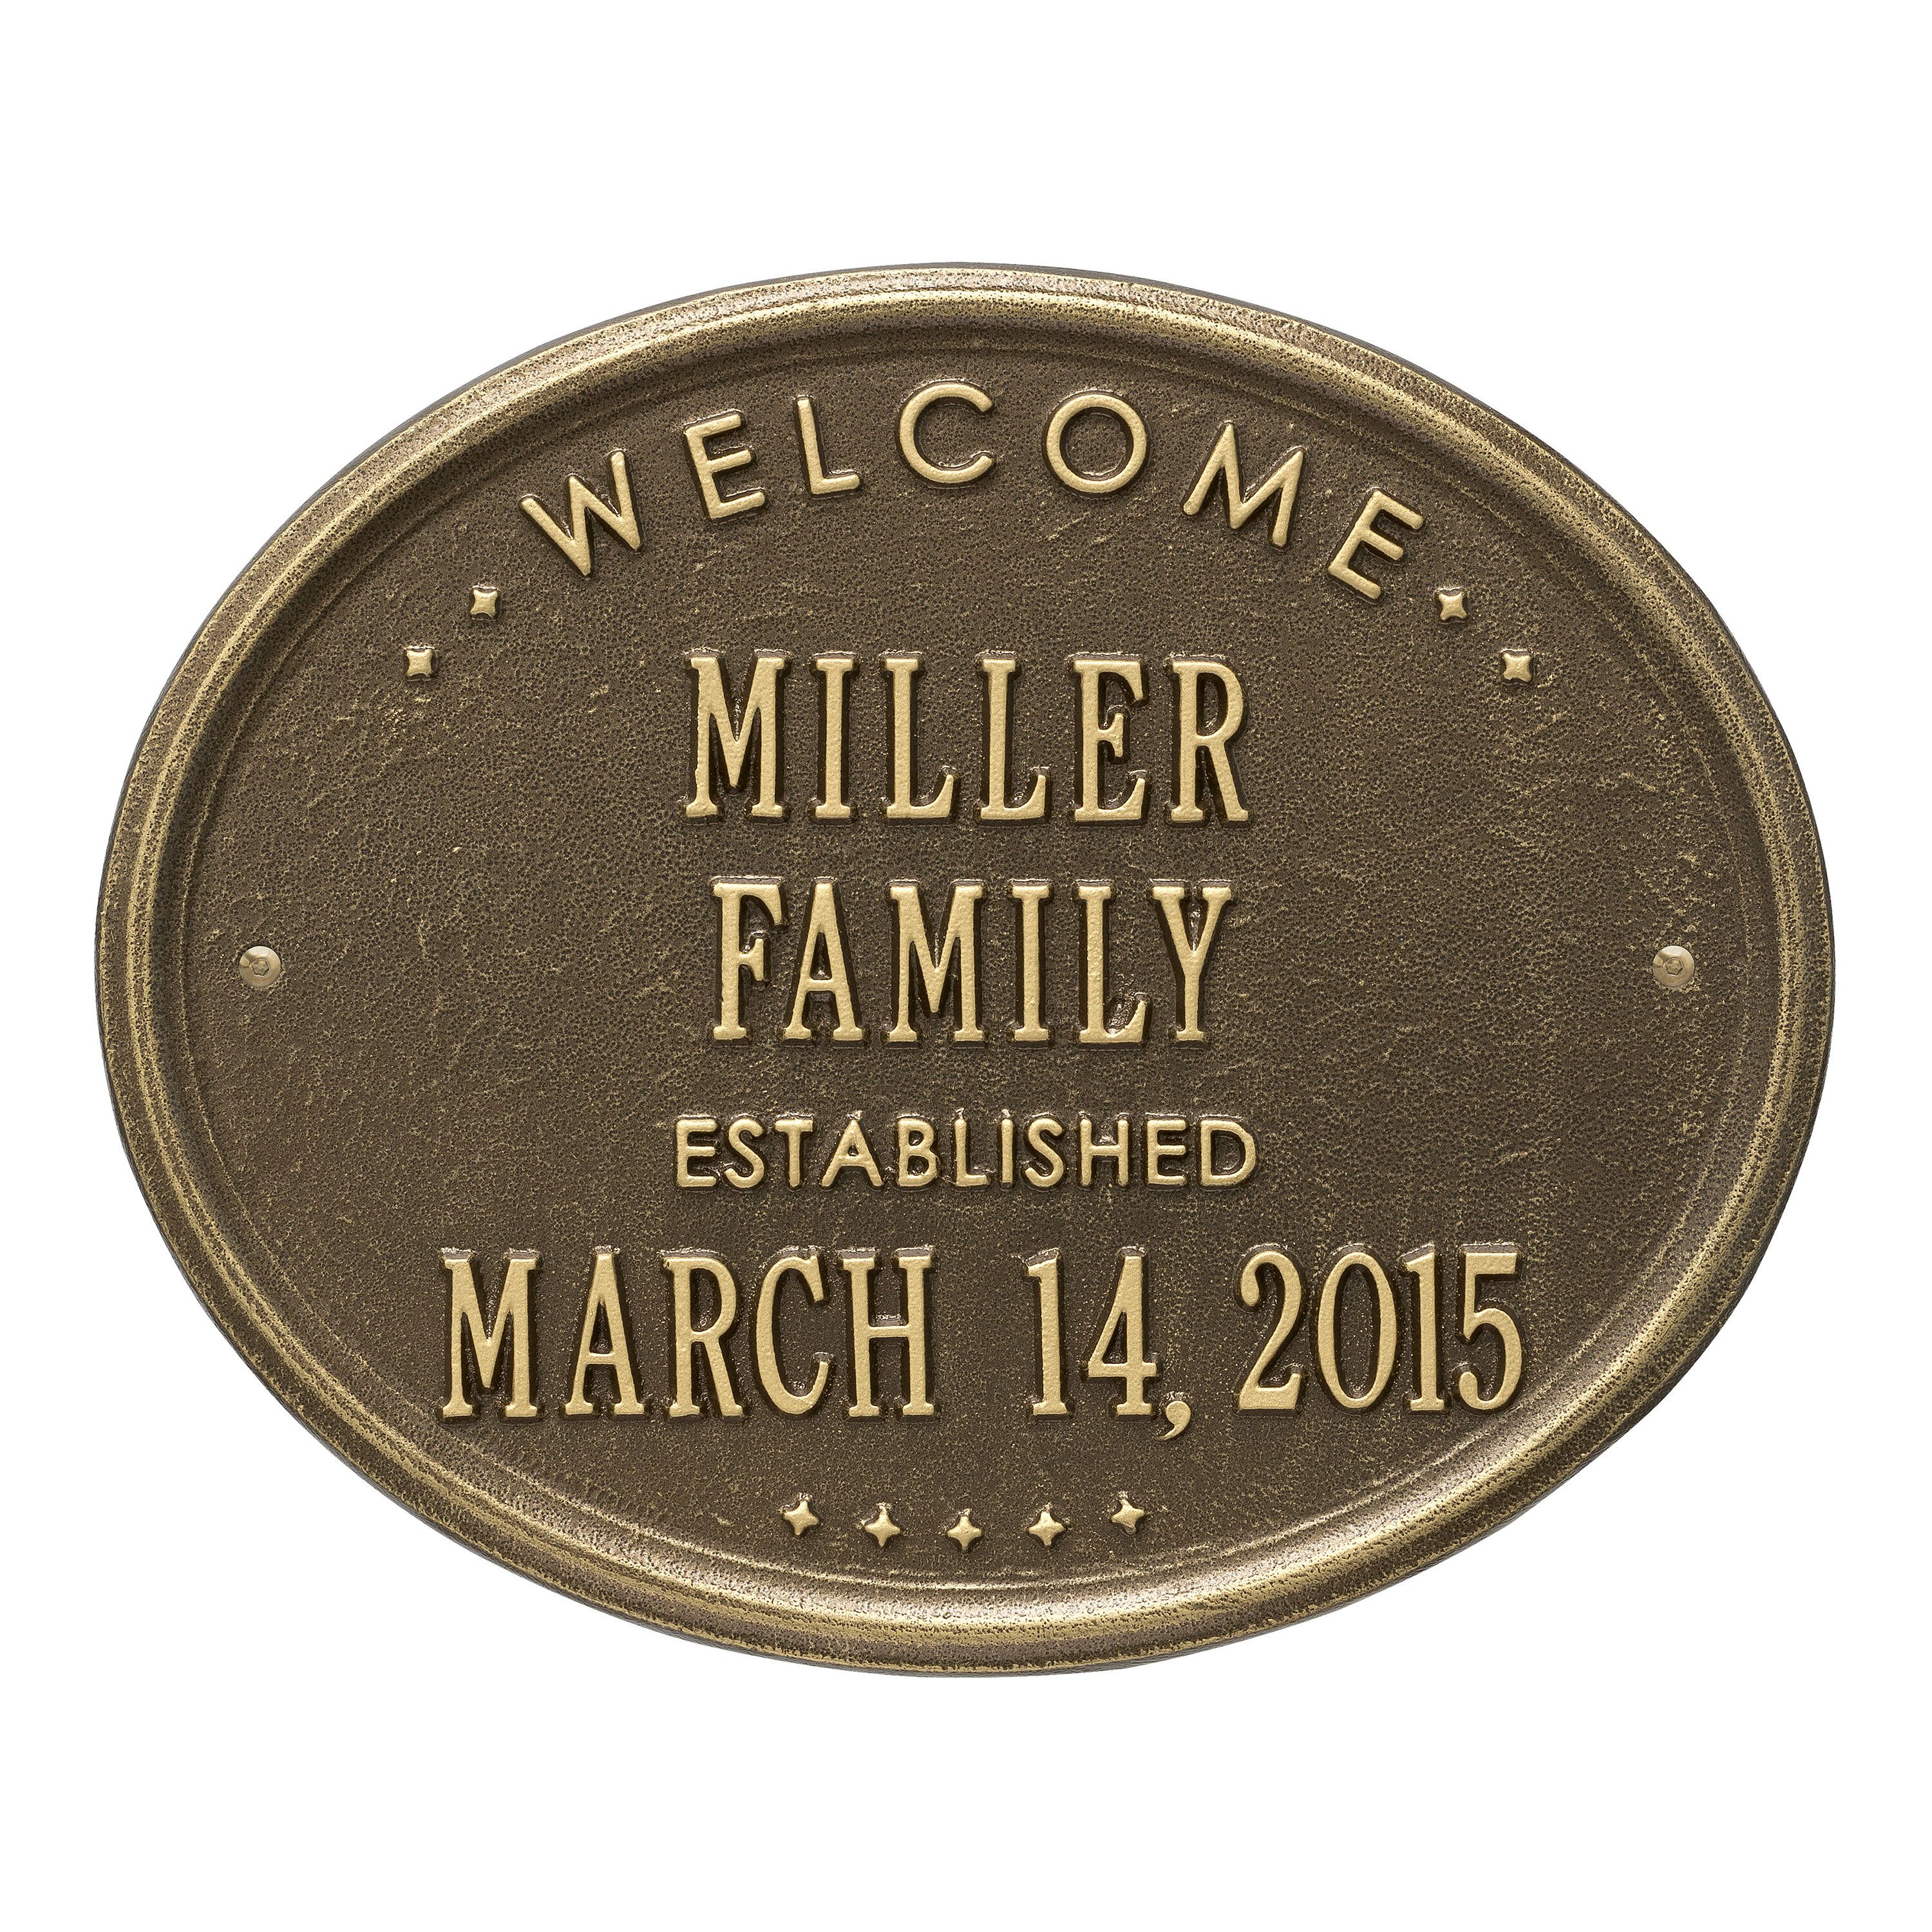 Whitehall Antique Brass Oval Plaque - 'Family' Established Wall Sign, Welcome Design - Standard Size